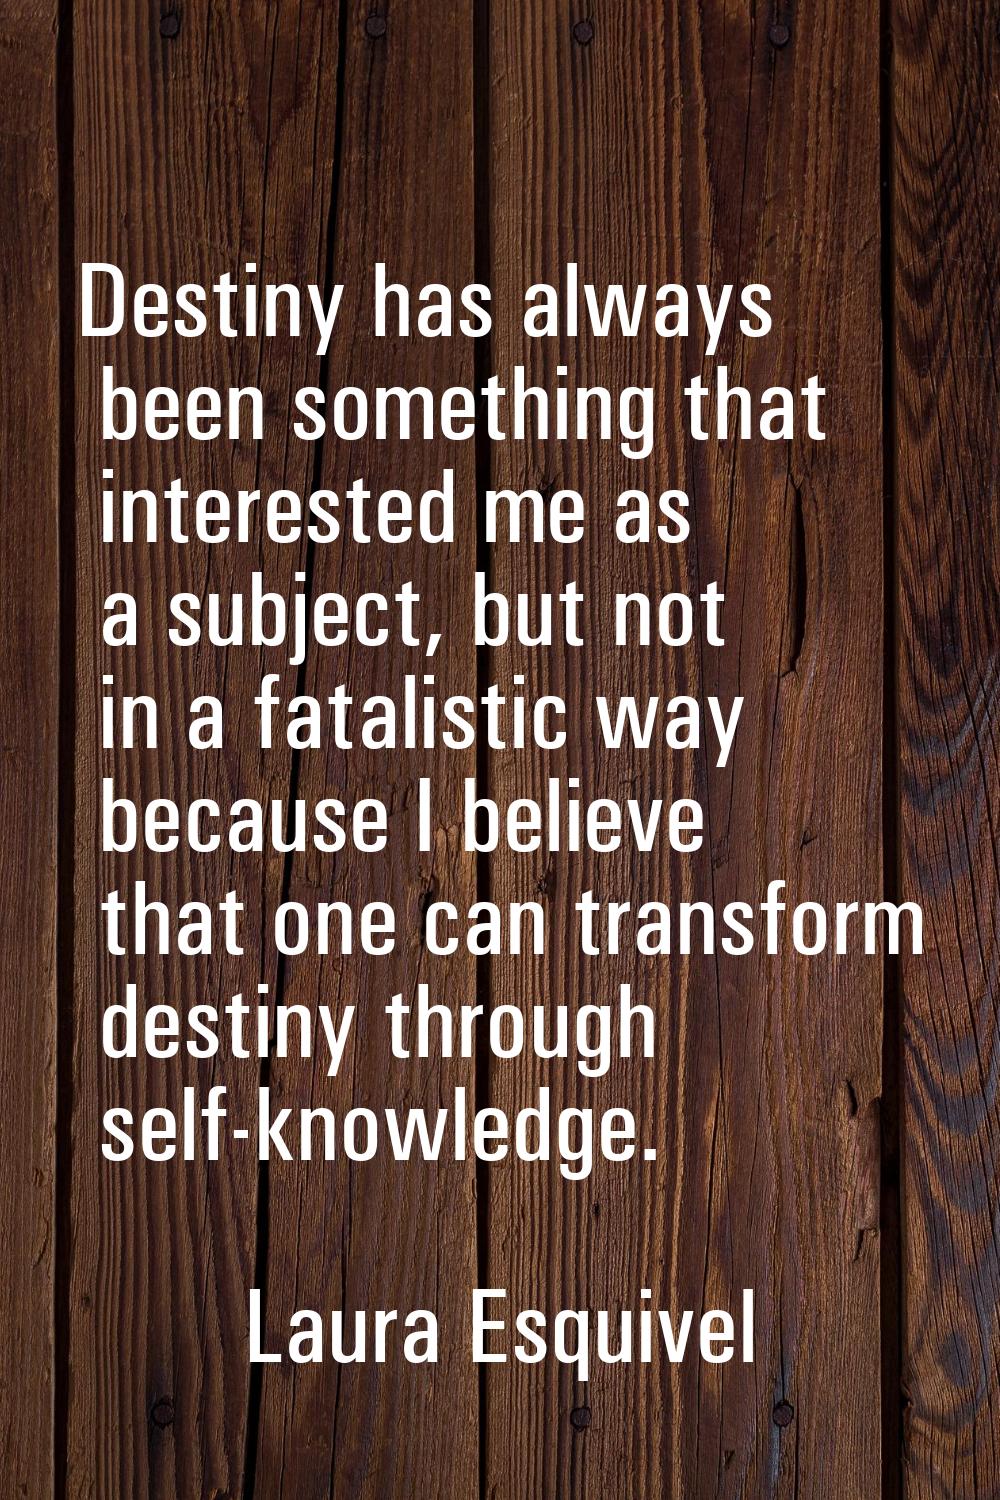 Destiny has always been something that interested me as a subject, but not in a fatalistic way beca